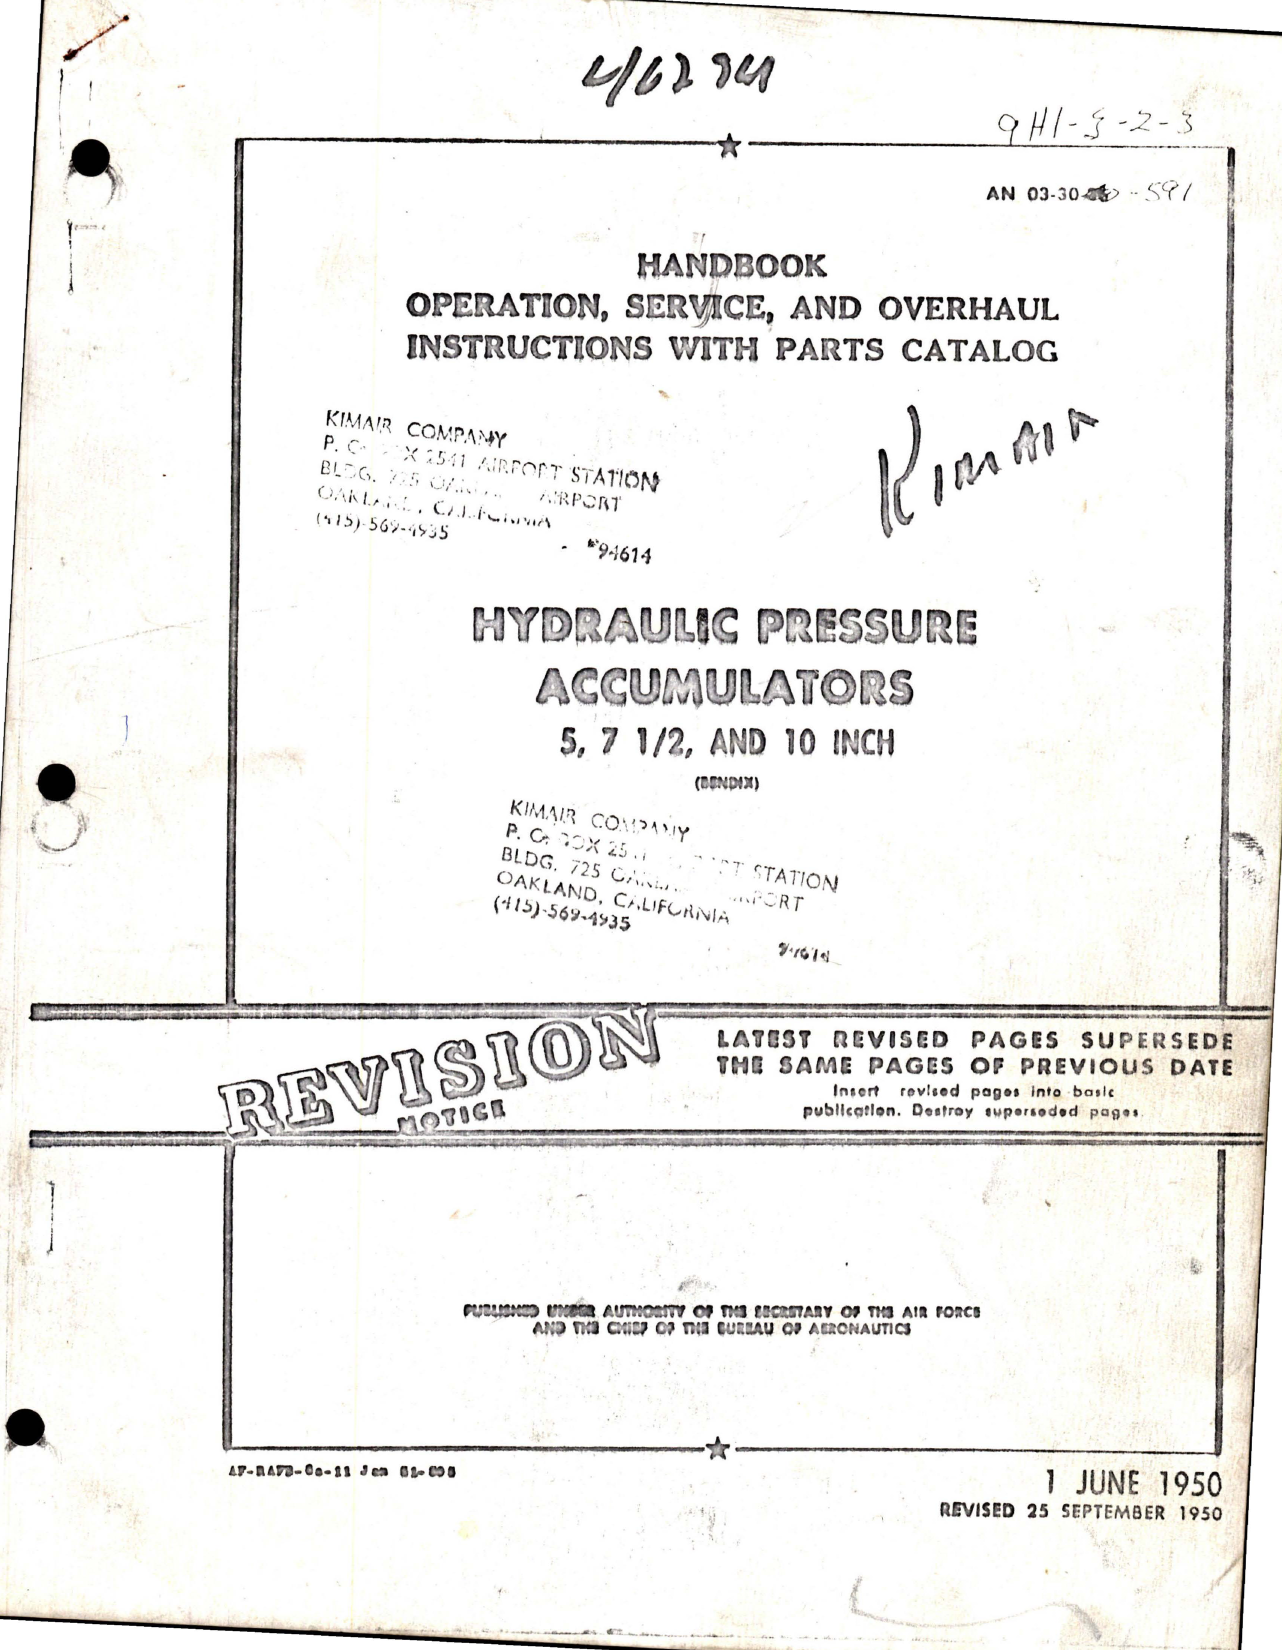 Sample page 1 from AirCorps Library document: Operation, Service, Overhaul with Parts for Hydraulic Pressure Accumulators - 5, 7 1/2 and 10 inch 